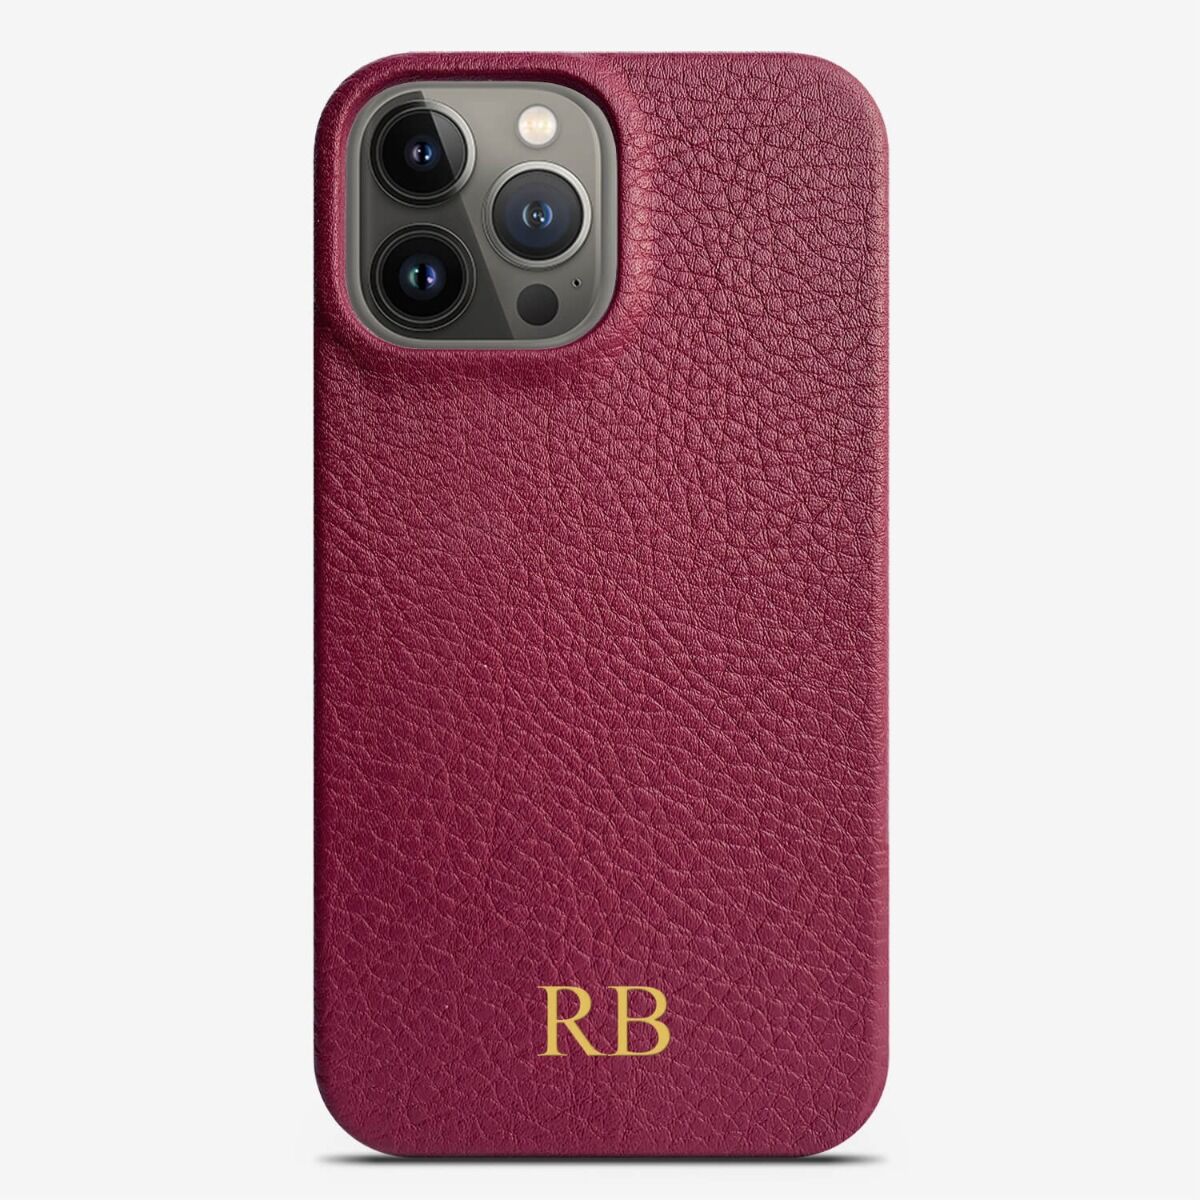 iPhone leather cases to personalise